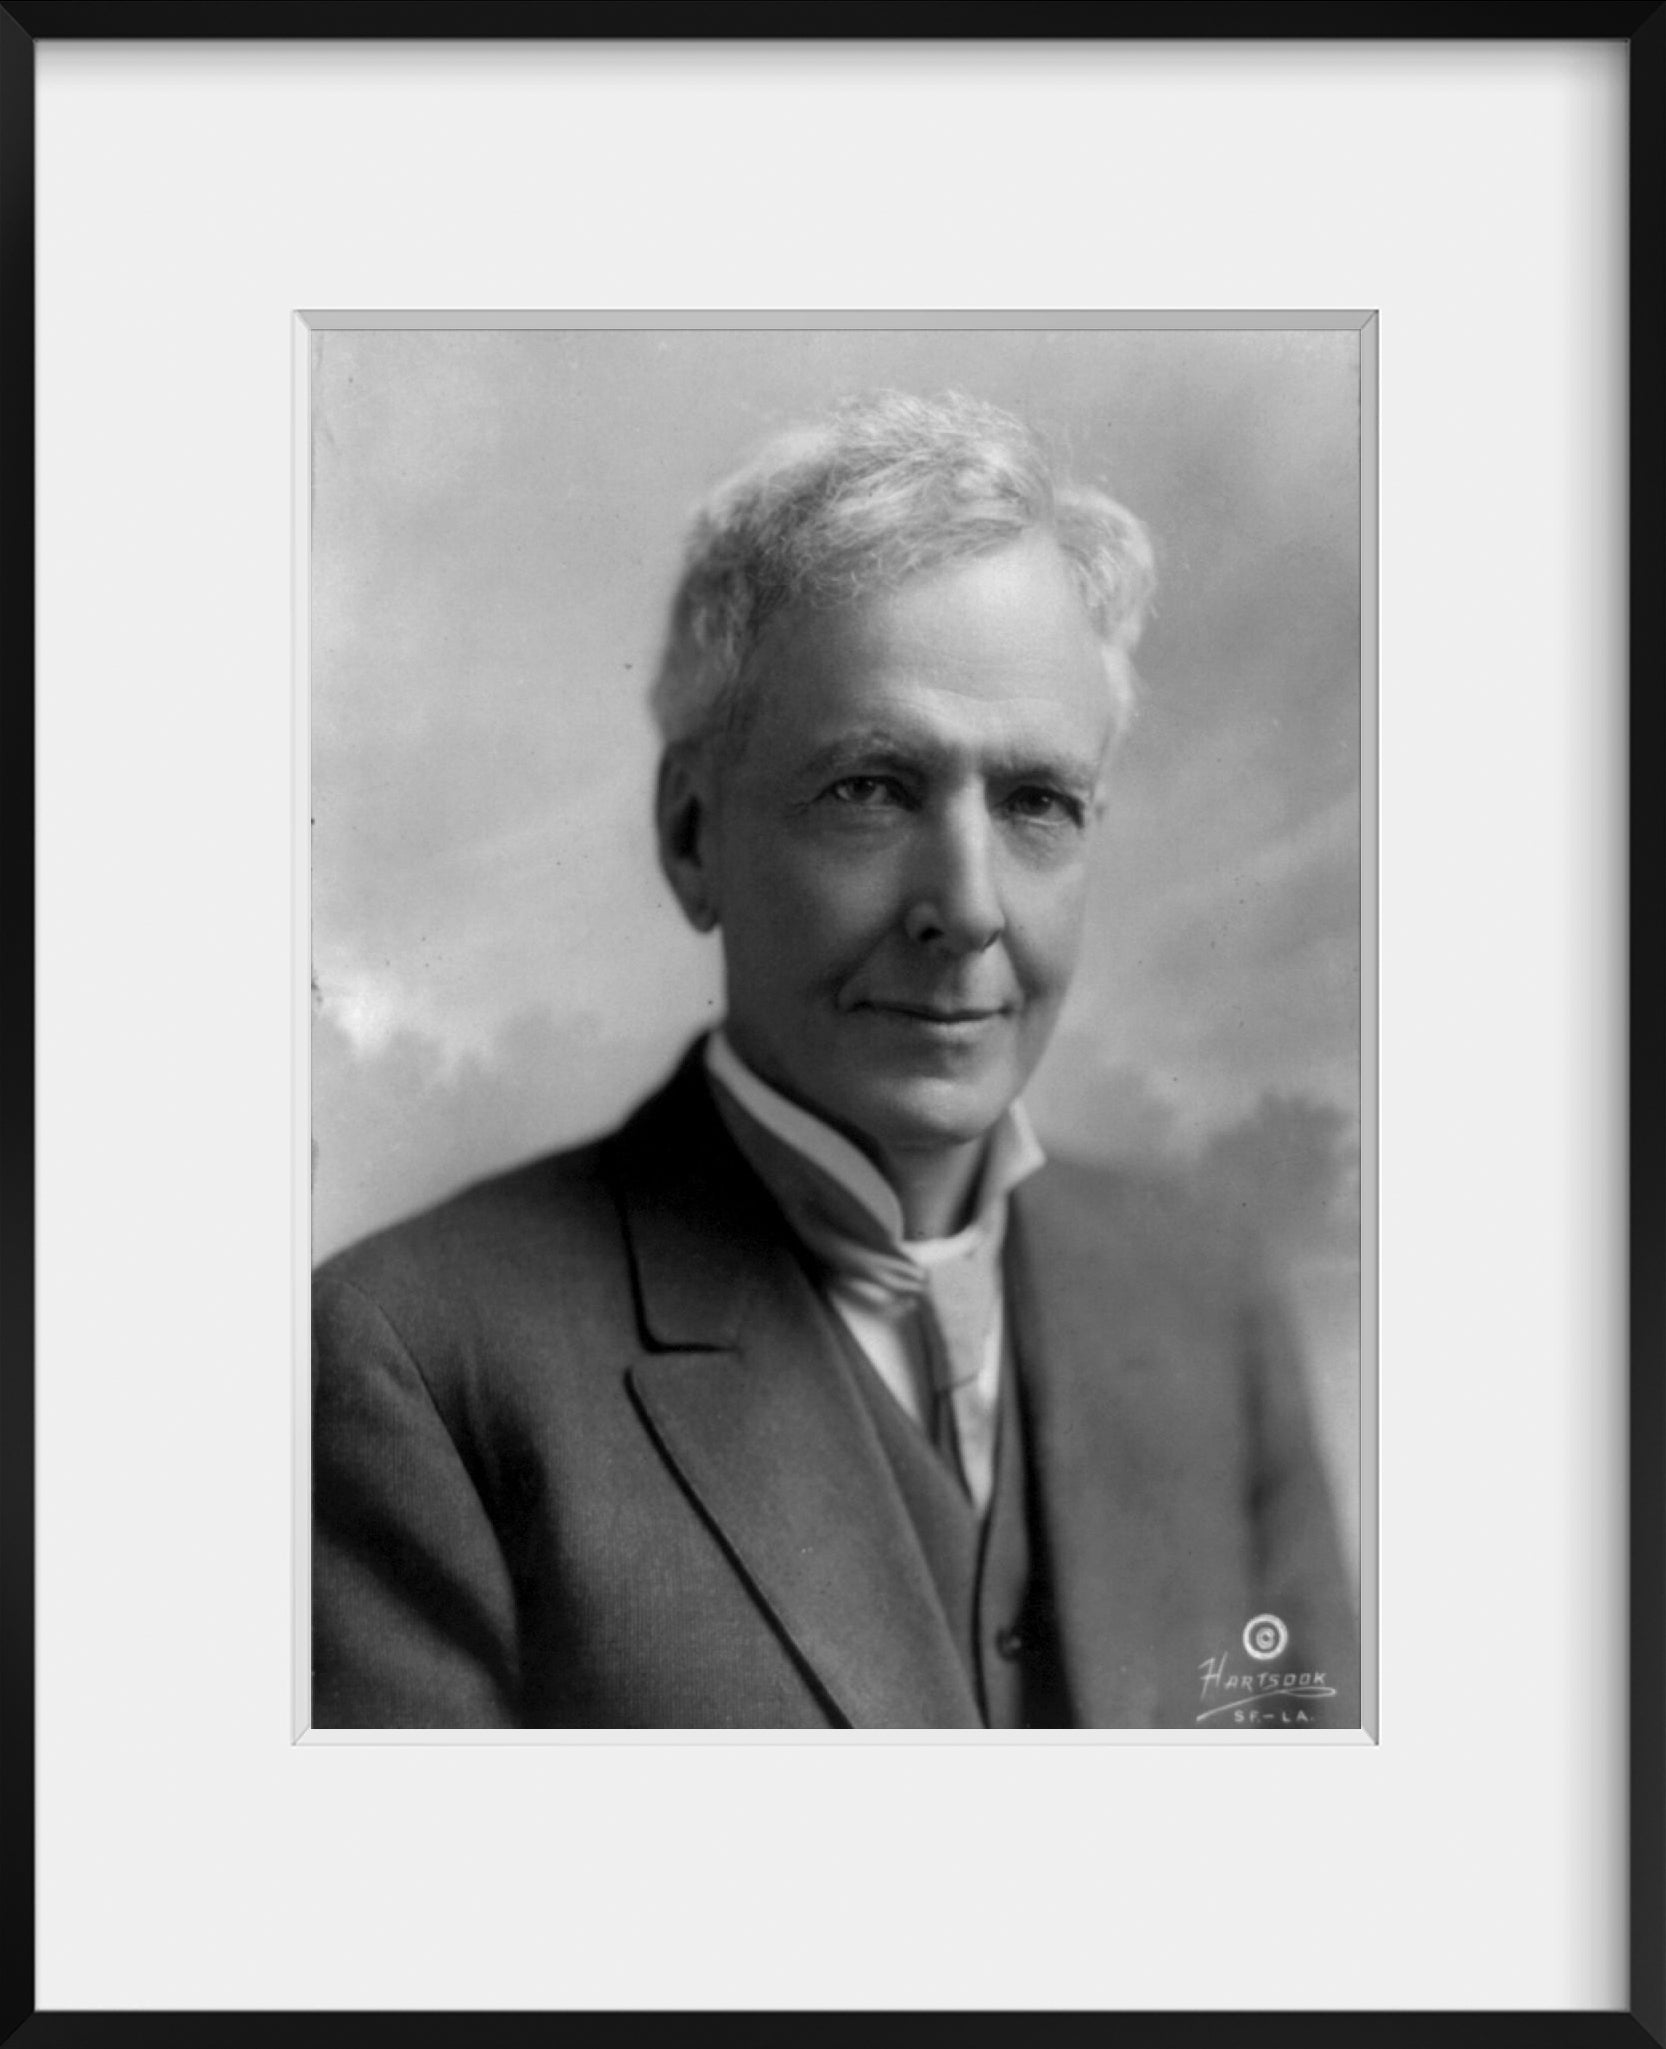 1915 photo of Luther Burbank. of photo: 6.8x10. Quality of photo: med Vi f9